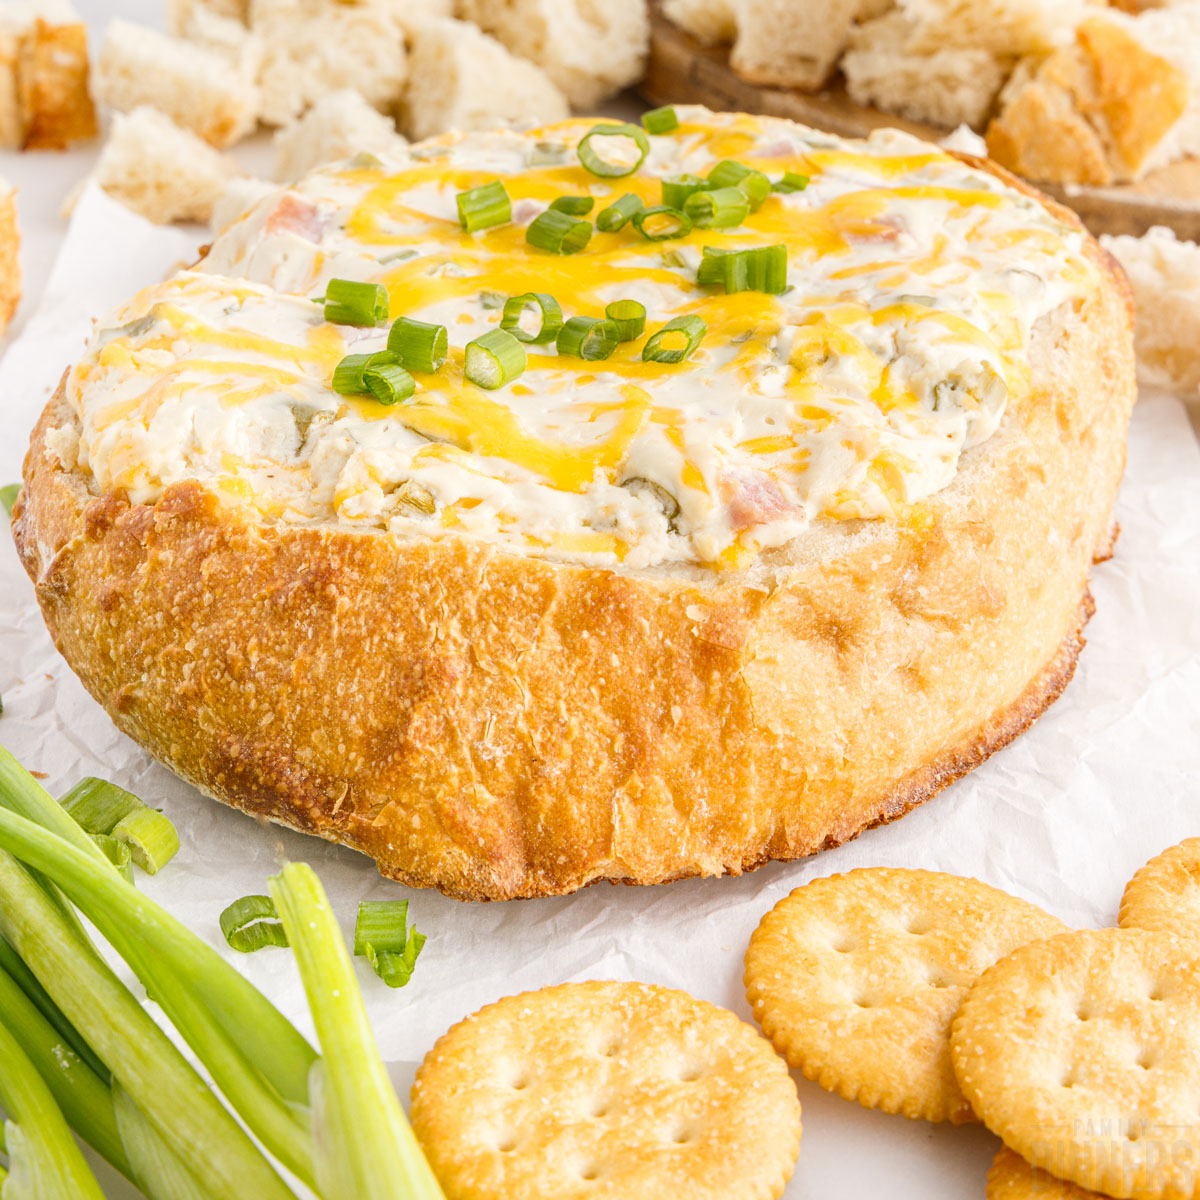 hot mississippi sin dip in a bread bowl with crackers and bread pieces